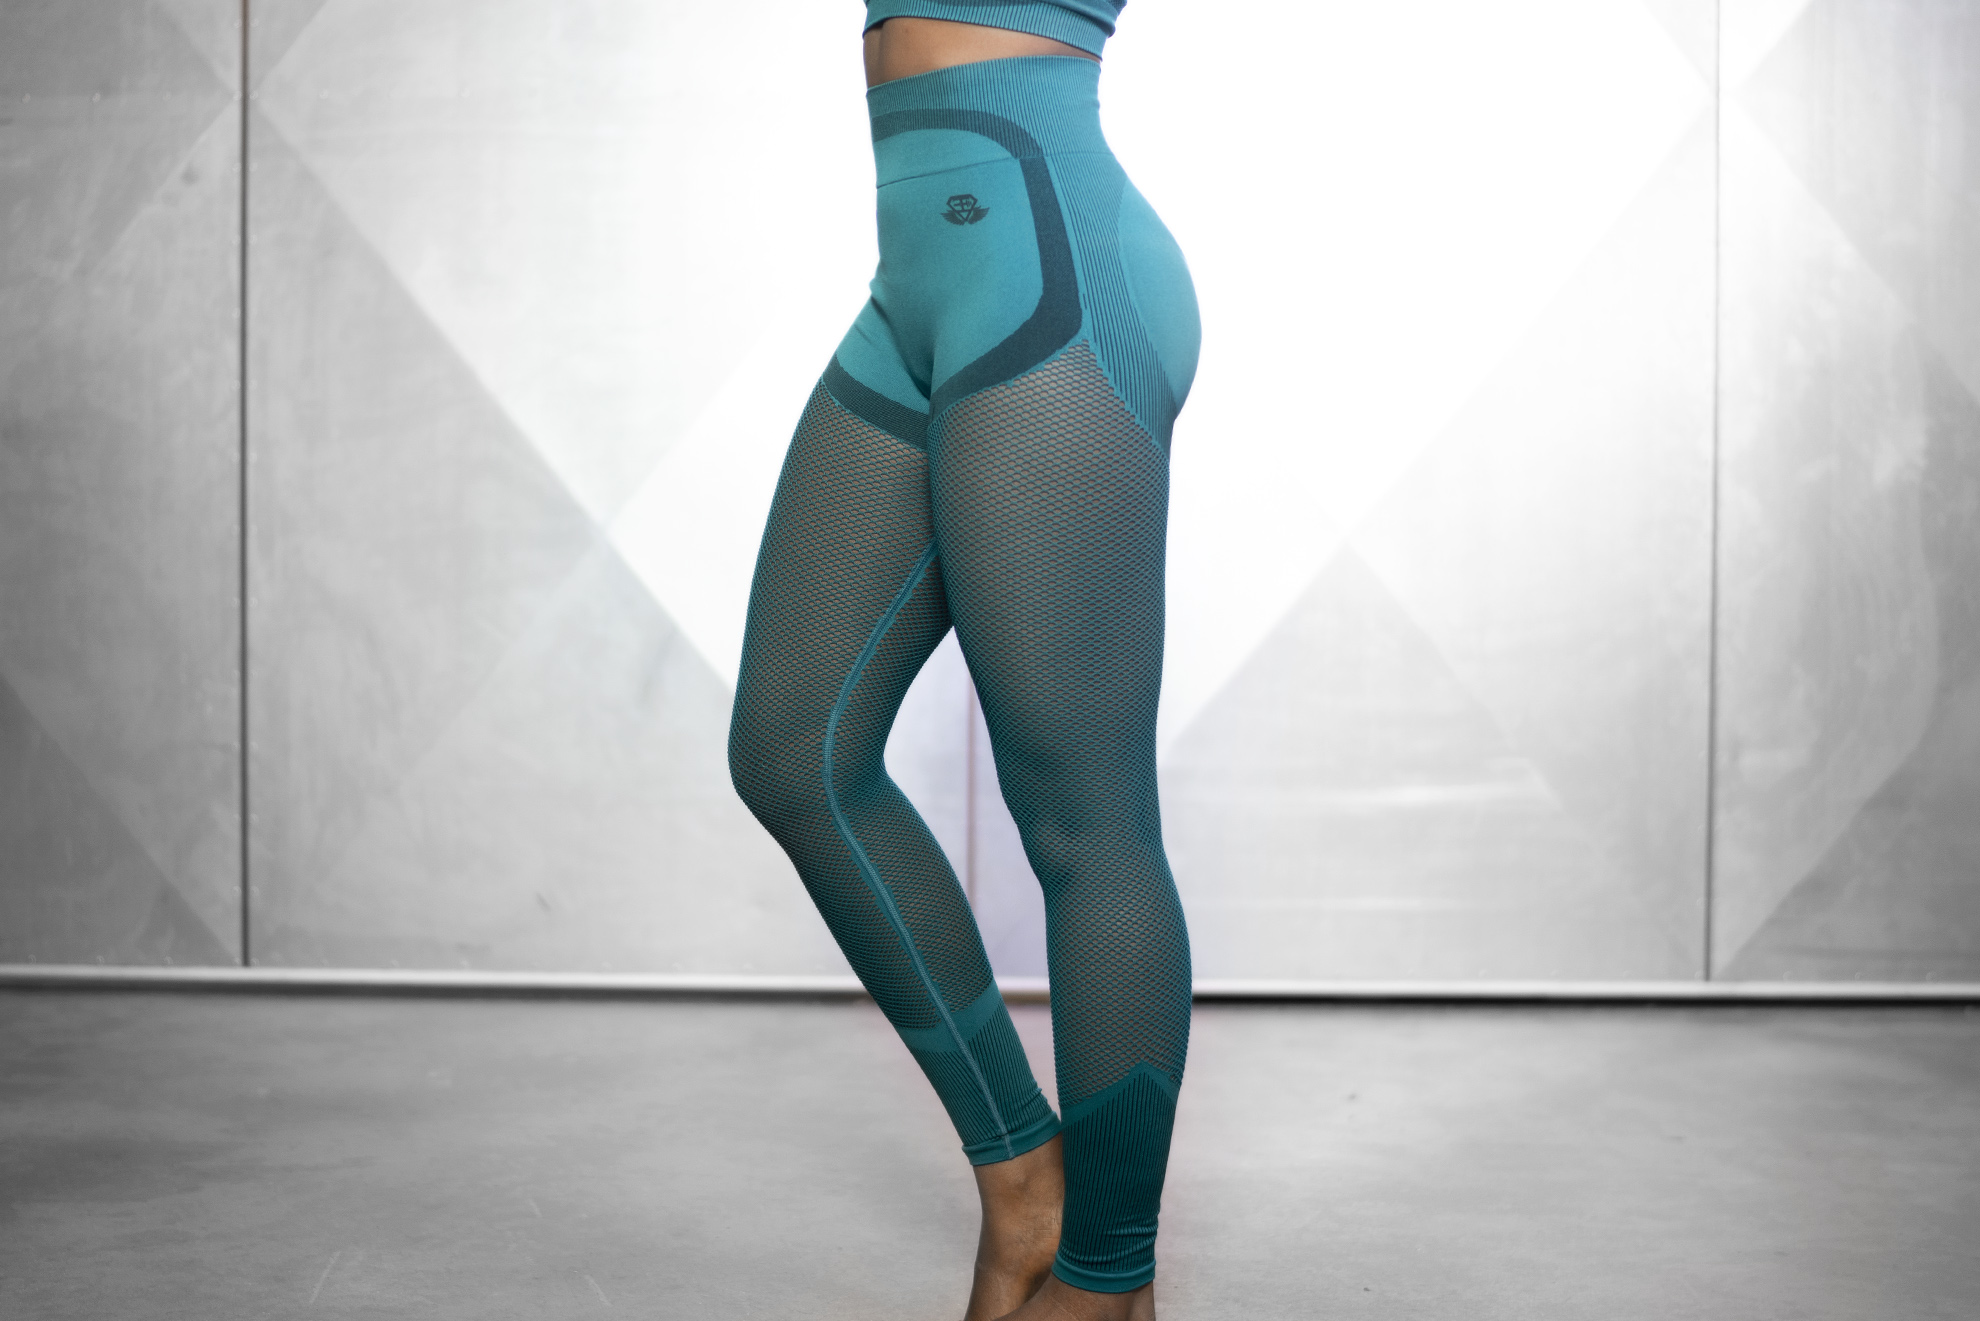 HPE Activewear - The wait is almost over! Our Skinny Compression Leggings  with mesh design will all be back in stock from December 5th available from  www.hpeclothing.com